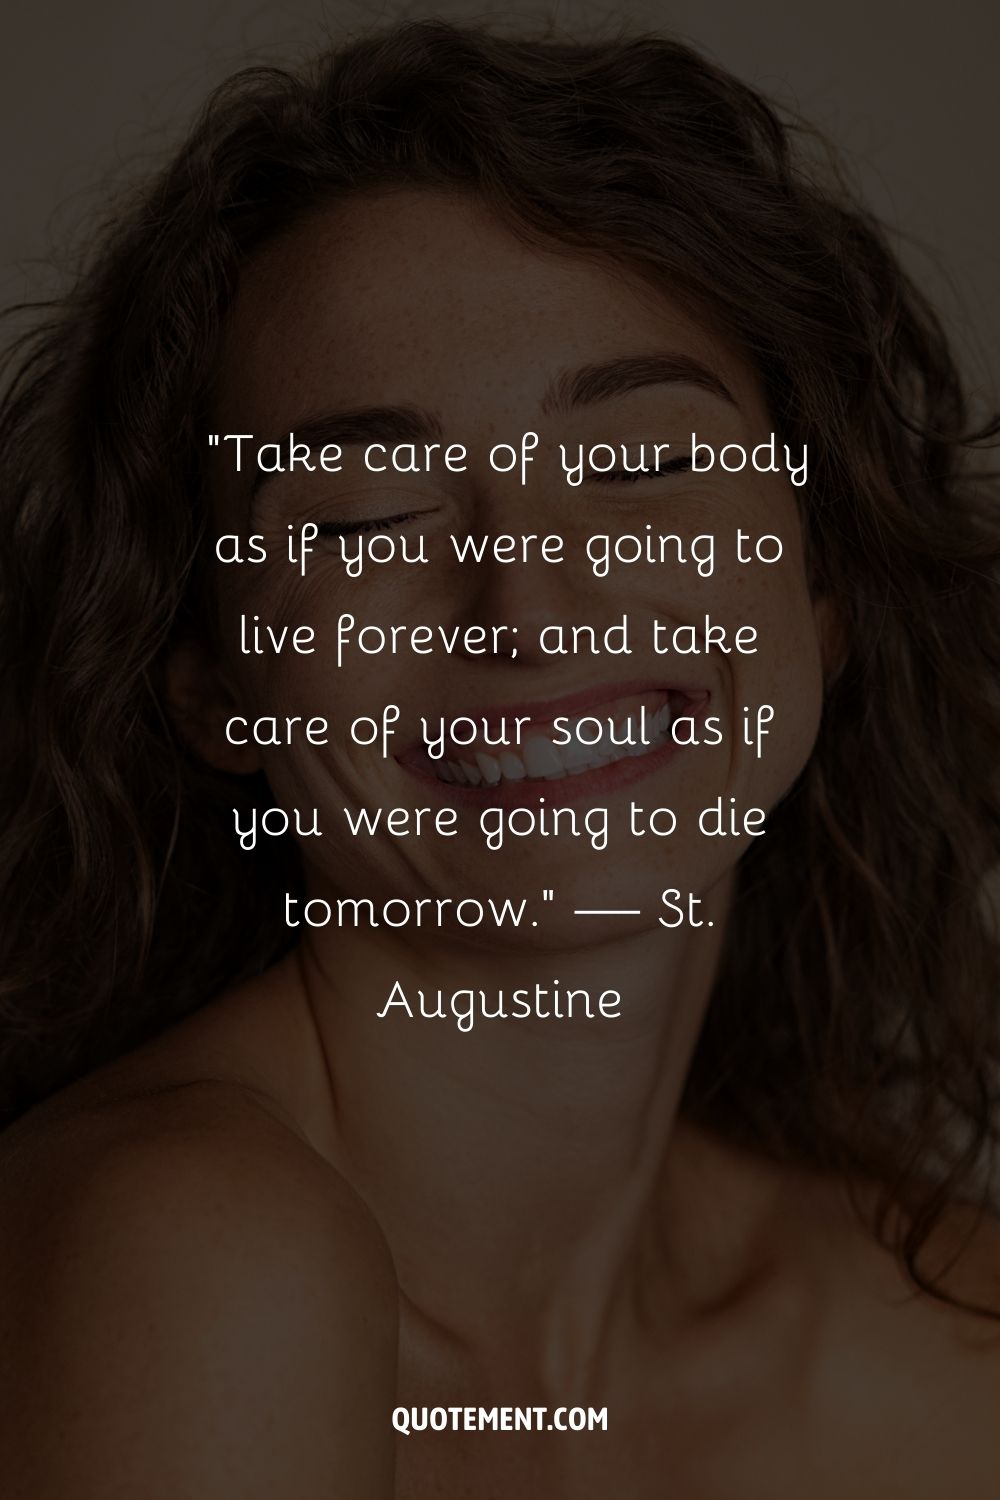 A close-up of a smiling woman with her eyes closed representing the best self-care quote
